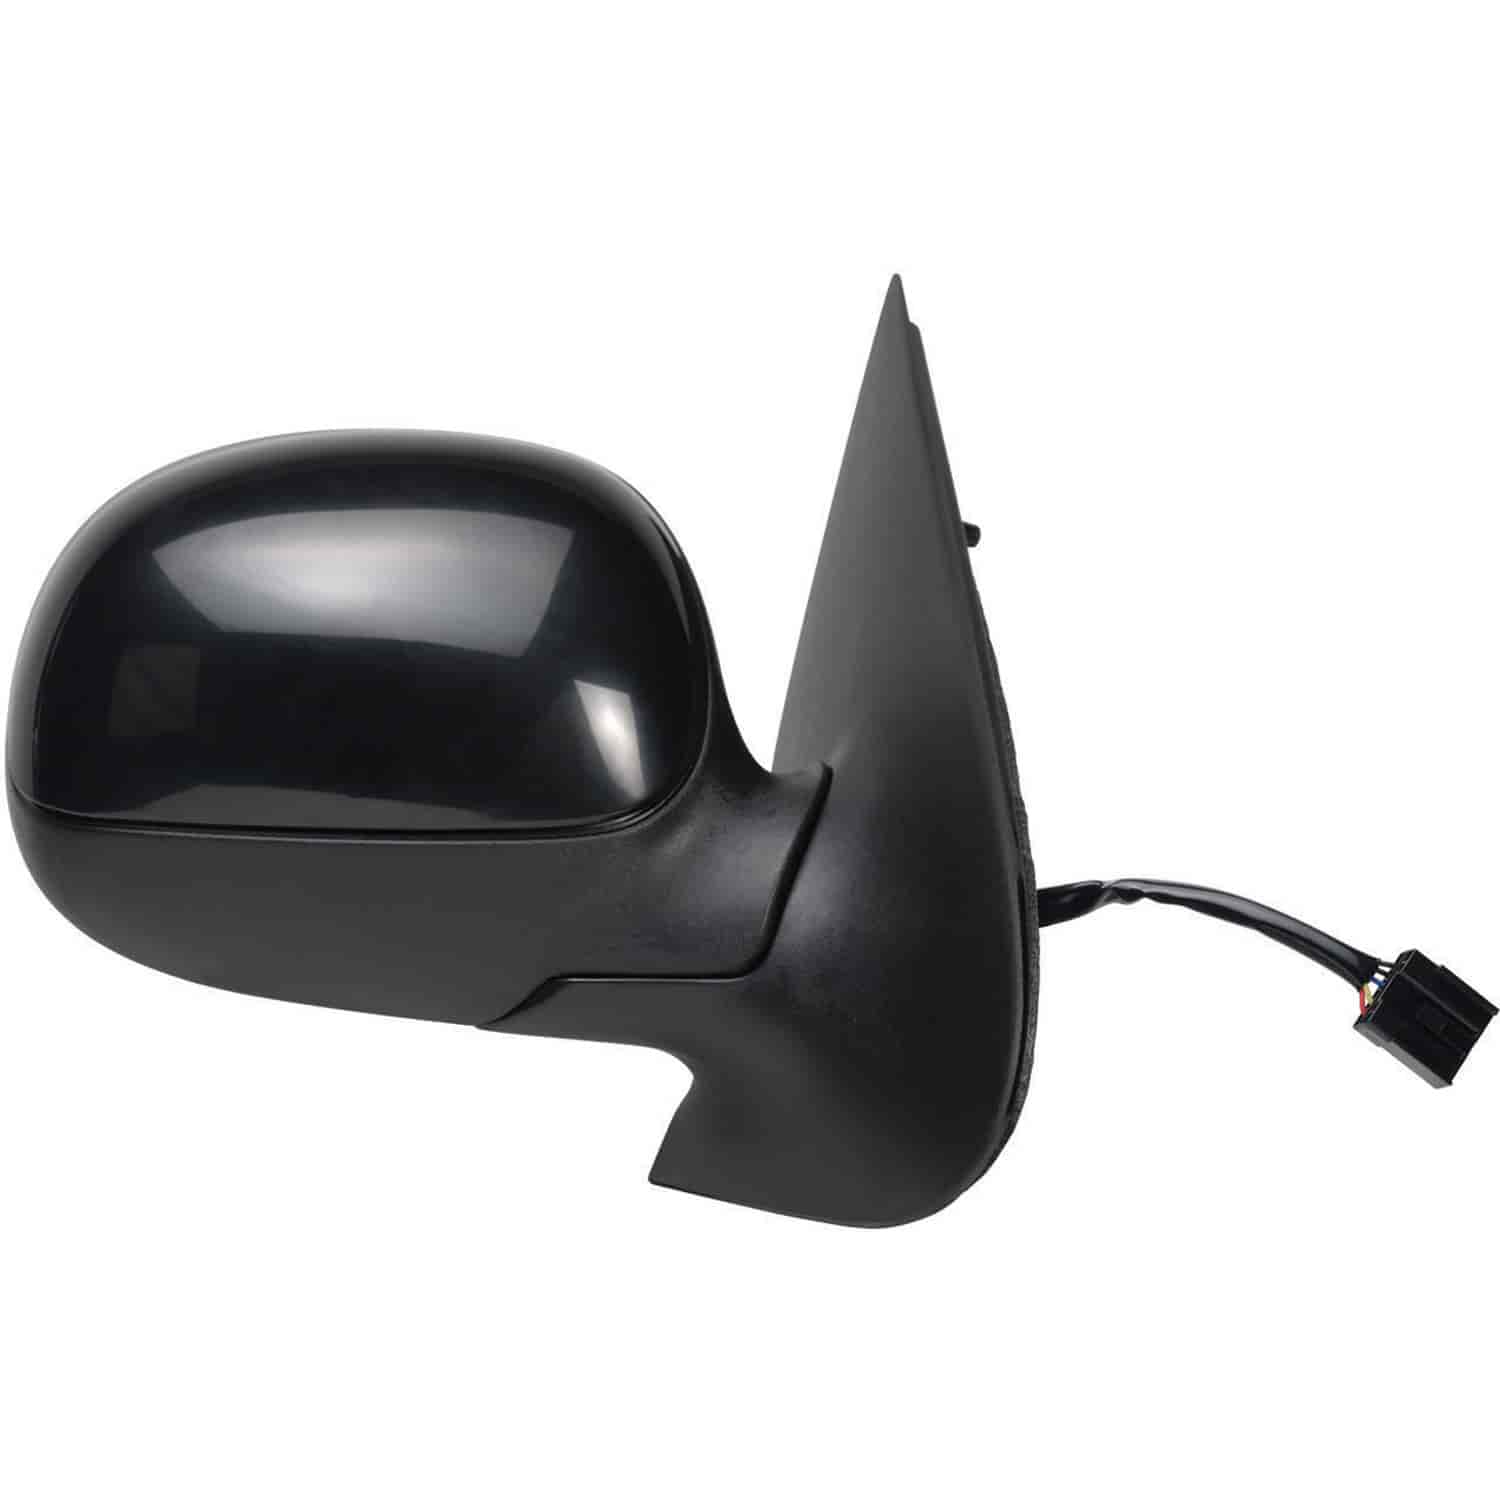 OEM Style Replacement mirror for 97-02 Ford Expedition passenger side mirror tested to fit and funct